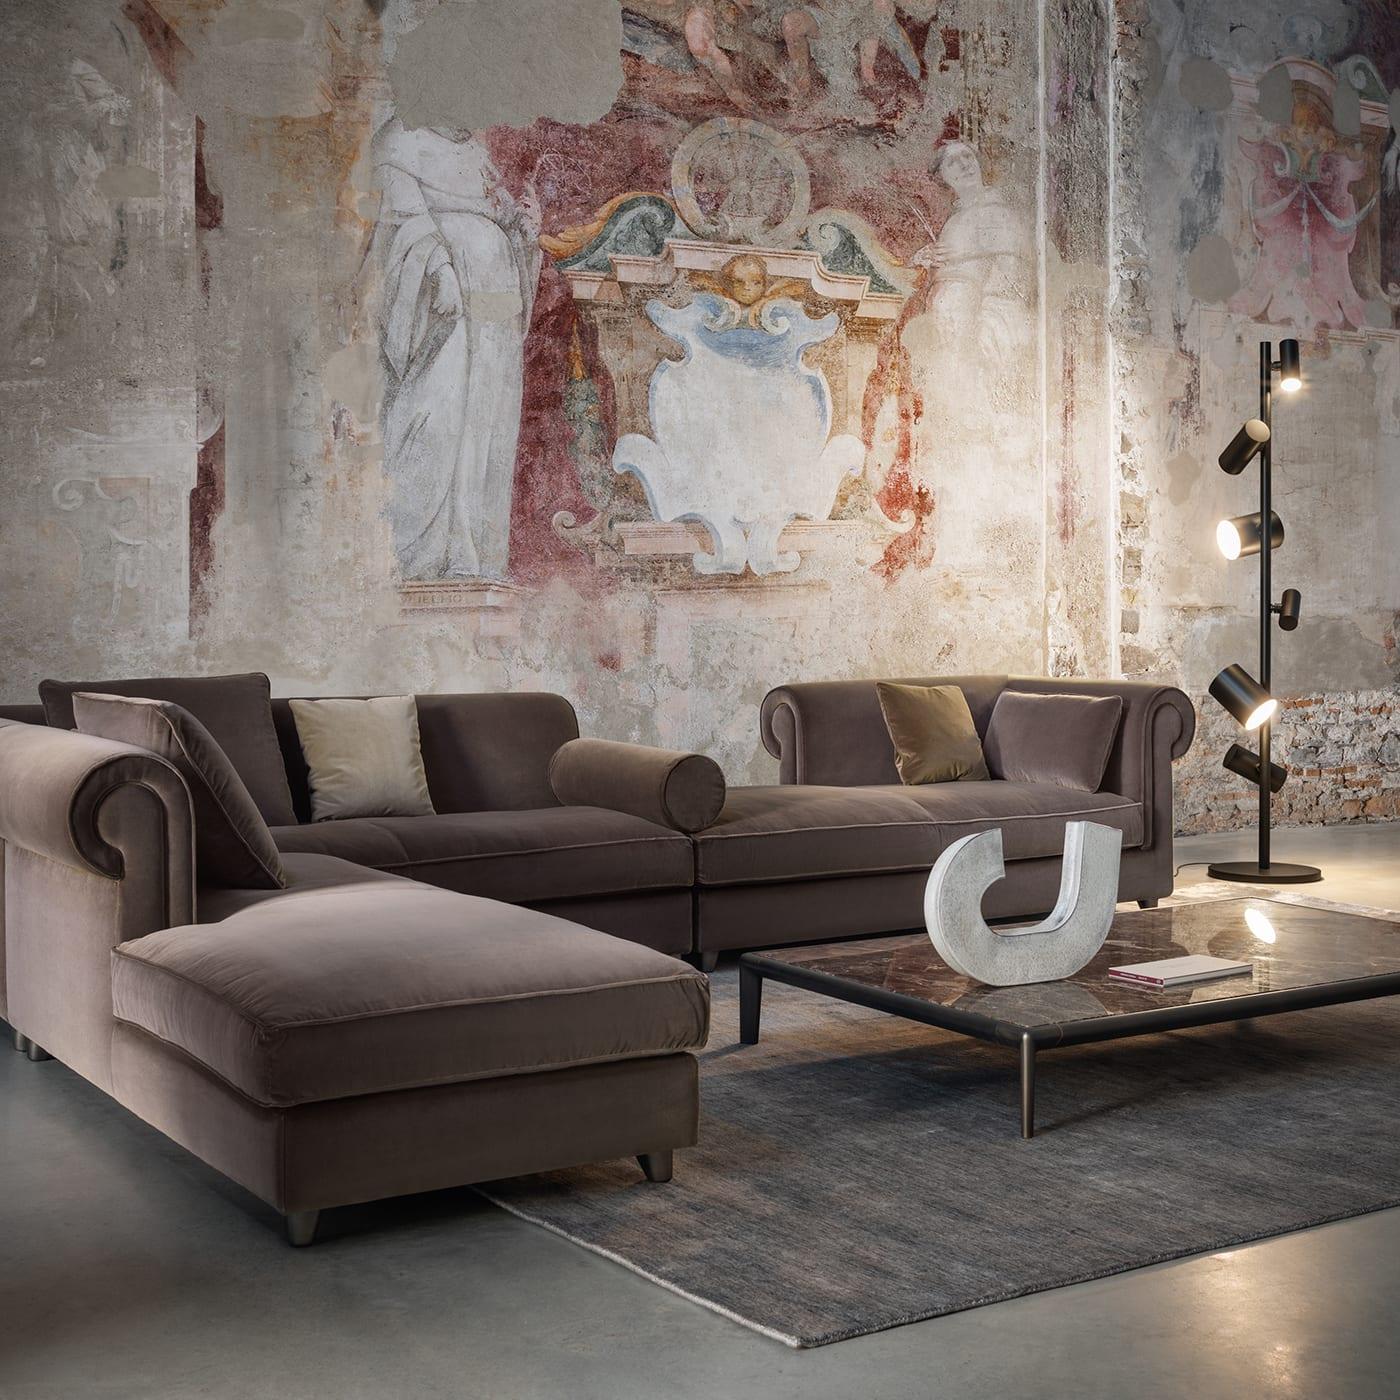 Named after the renowned town from the Italian Riviera and echoing its exclusive charm, this angular sofa will imprint a classy accent to wide modern living rooms. The neutral shade of its fabric upholstery makes it versatile and timelessly elegant,